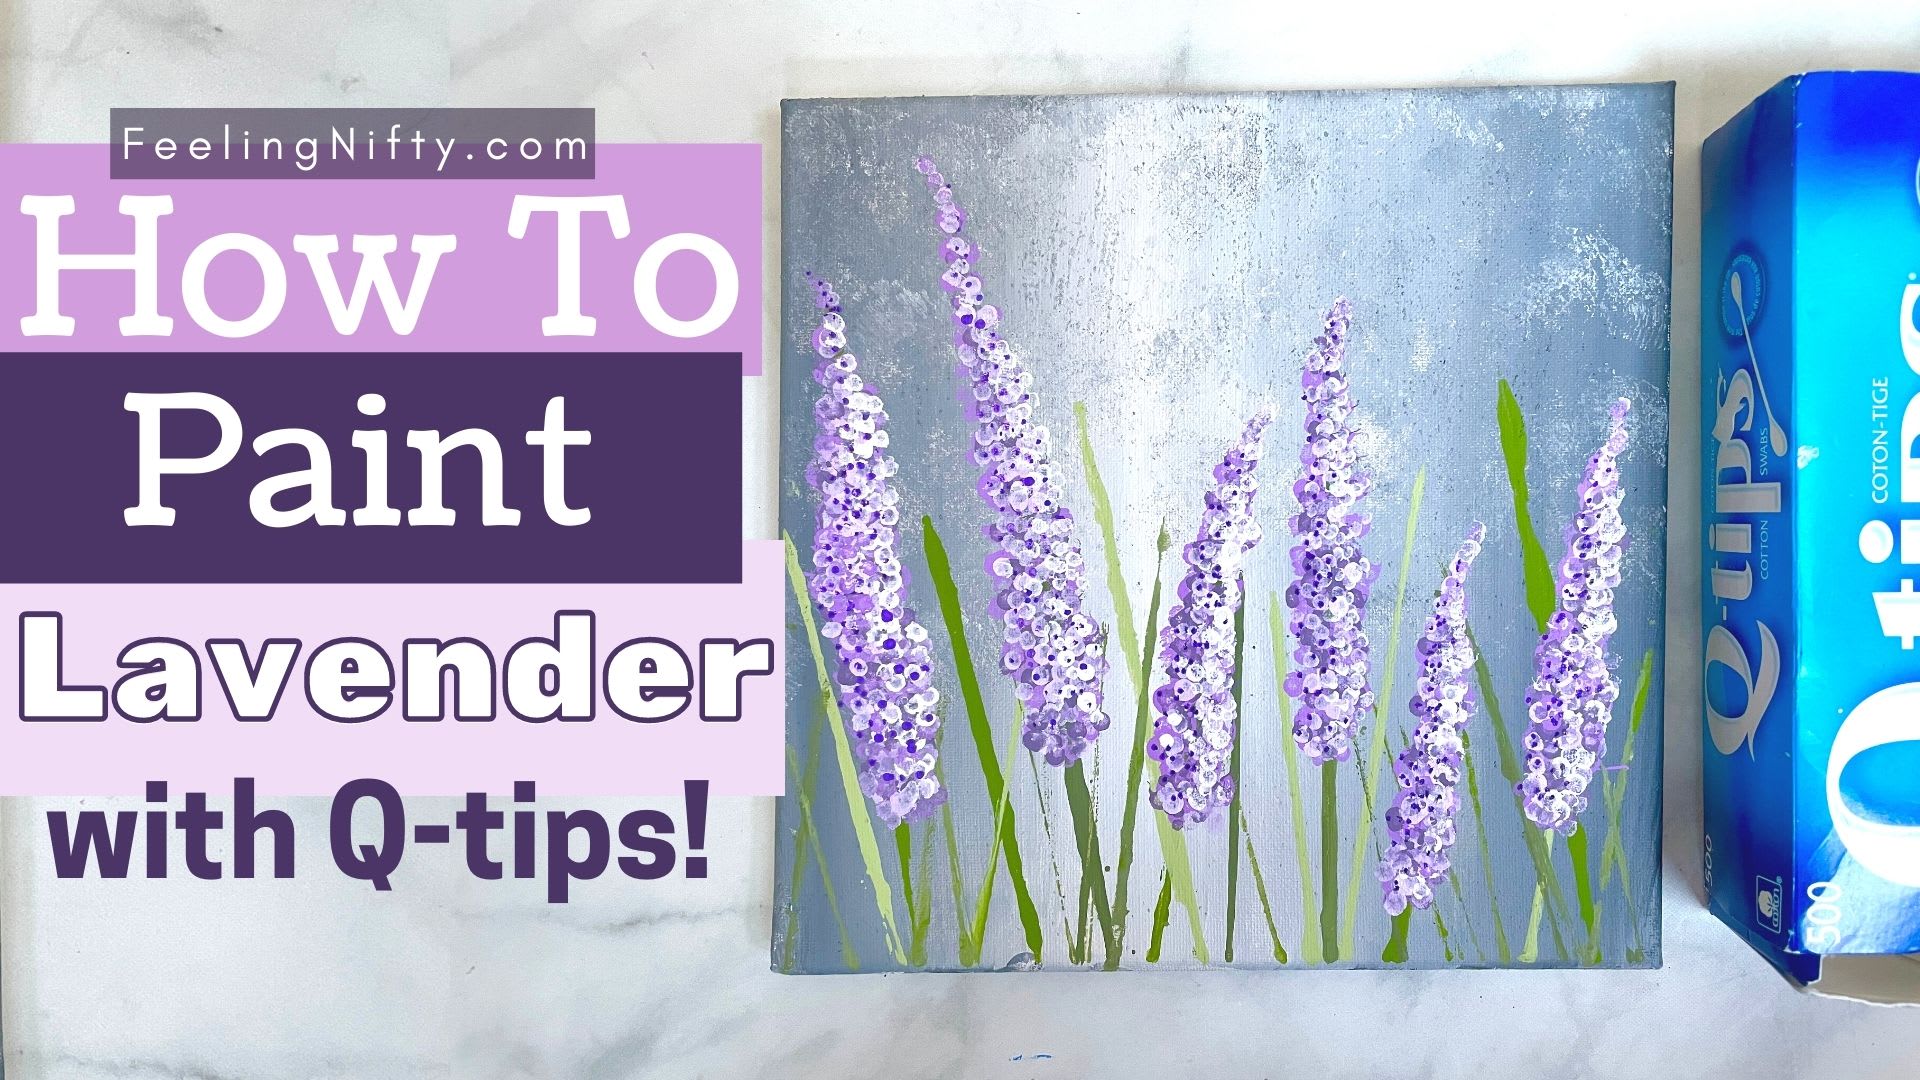 How To Paint Lavender: Easy Flower Painting Tutorial for Beginners